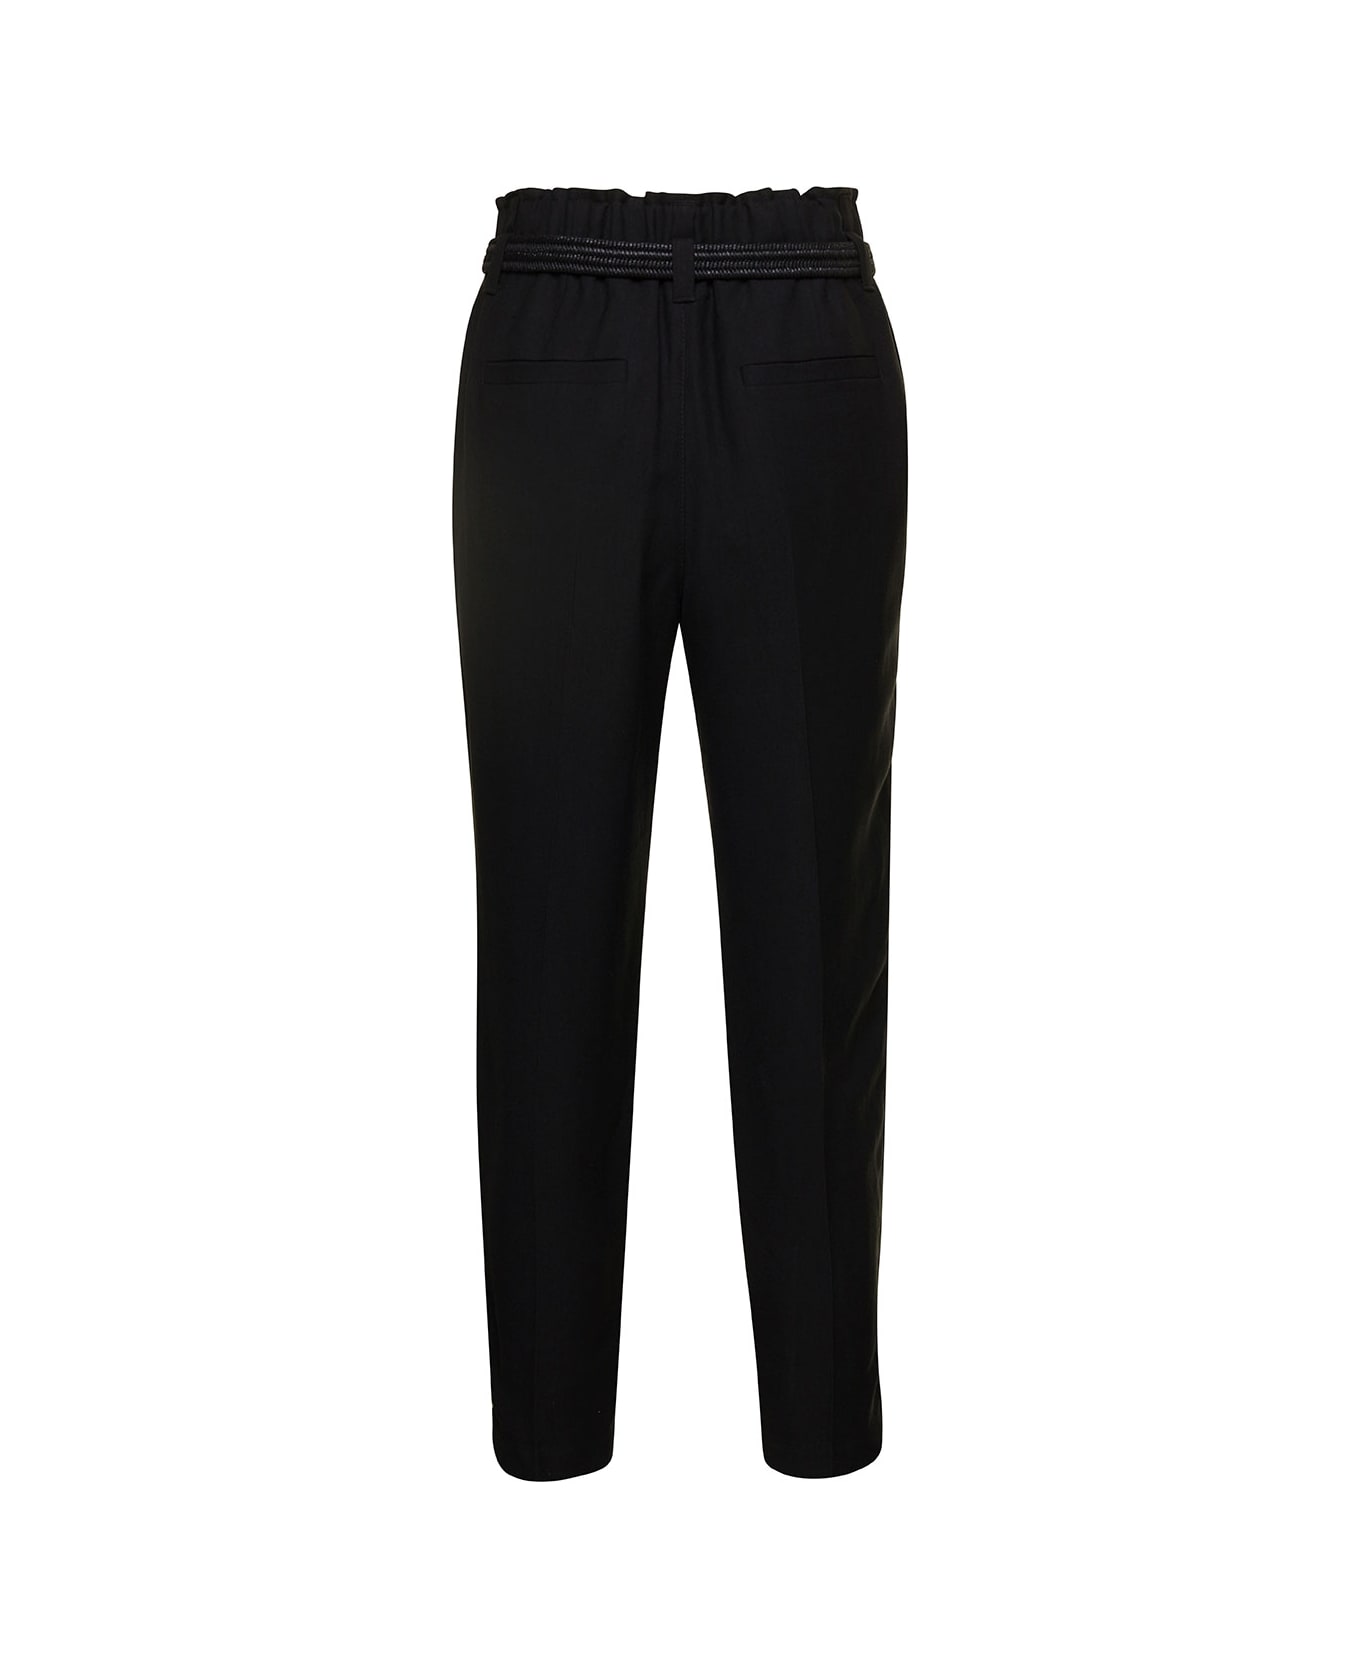 Brunello Cucinelli Black Cropped Pull-up Pants With Belt In Rayon Blend Woman - Black ボトムス